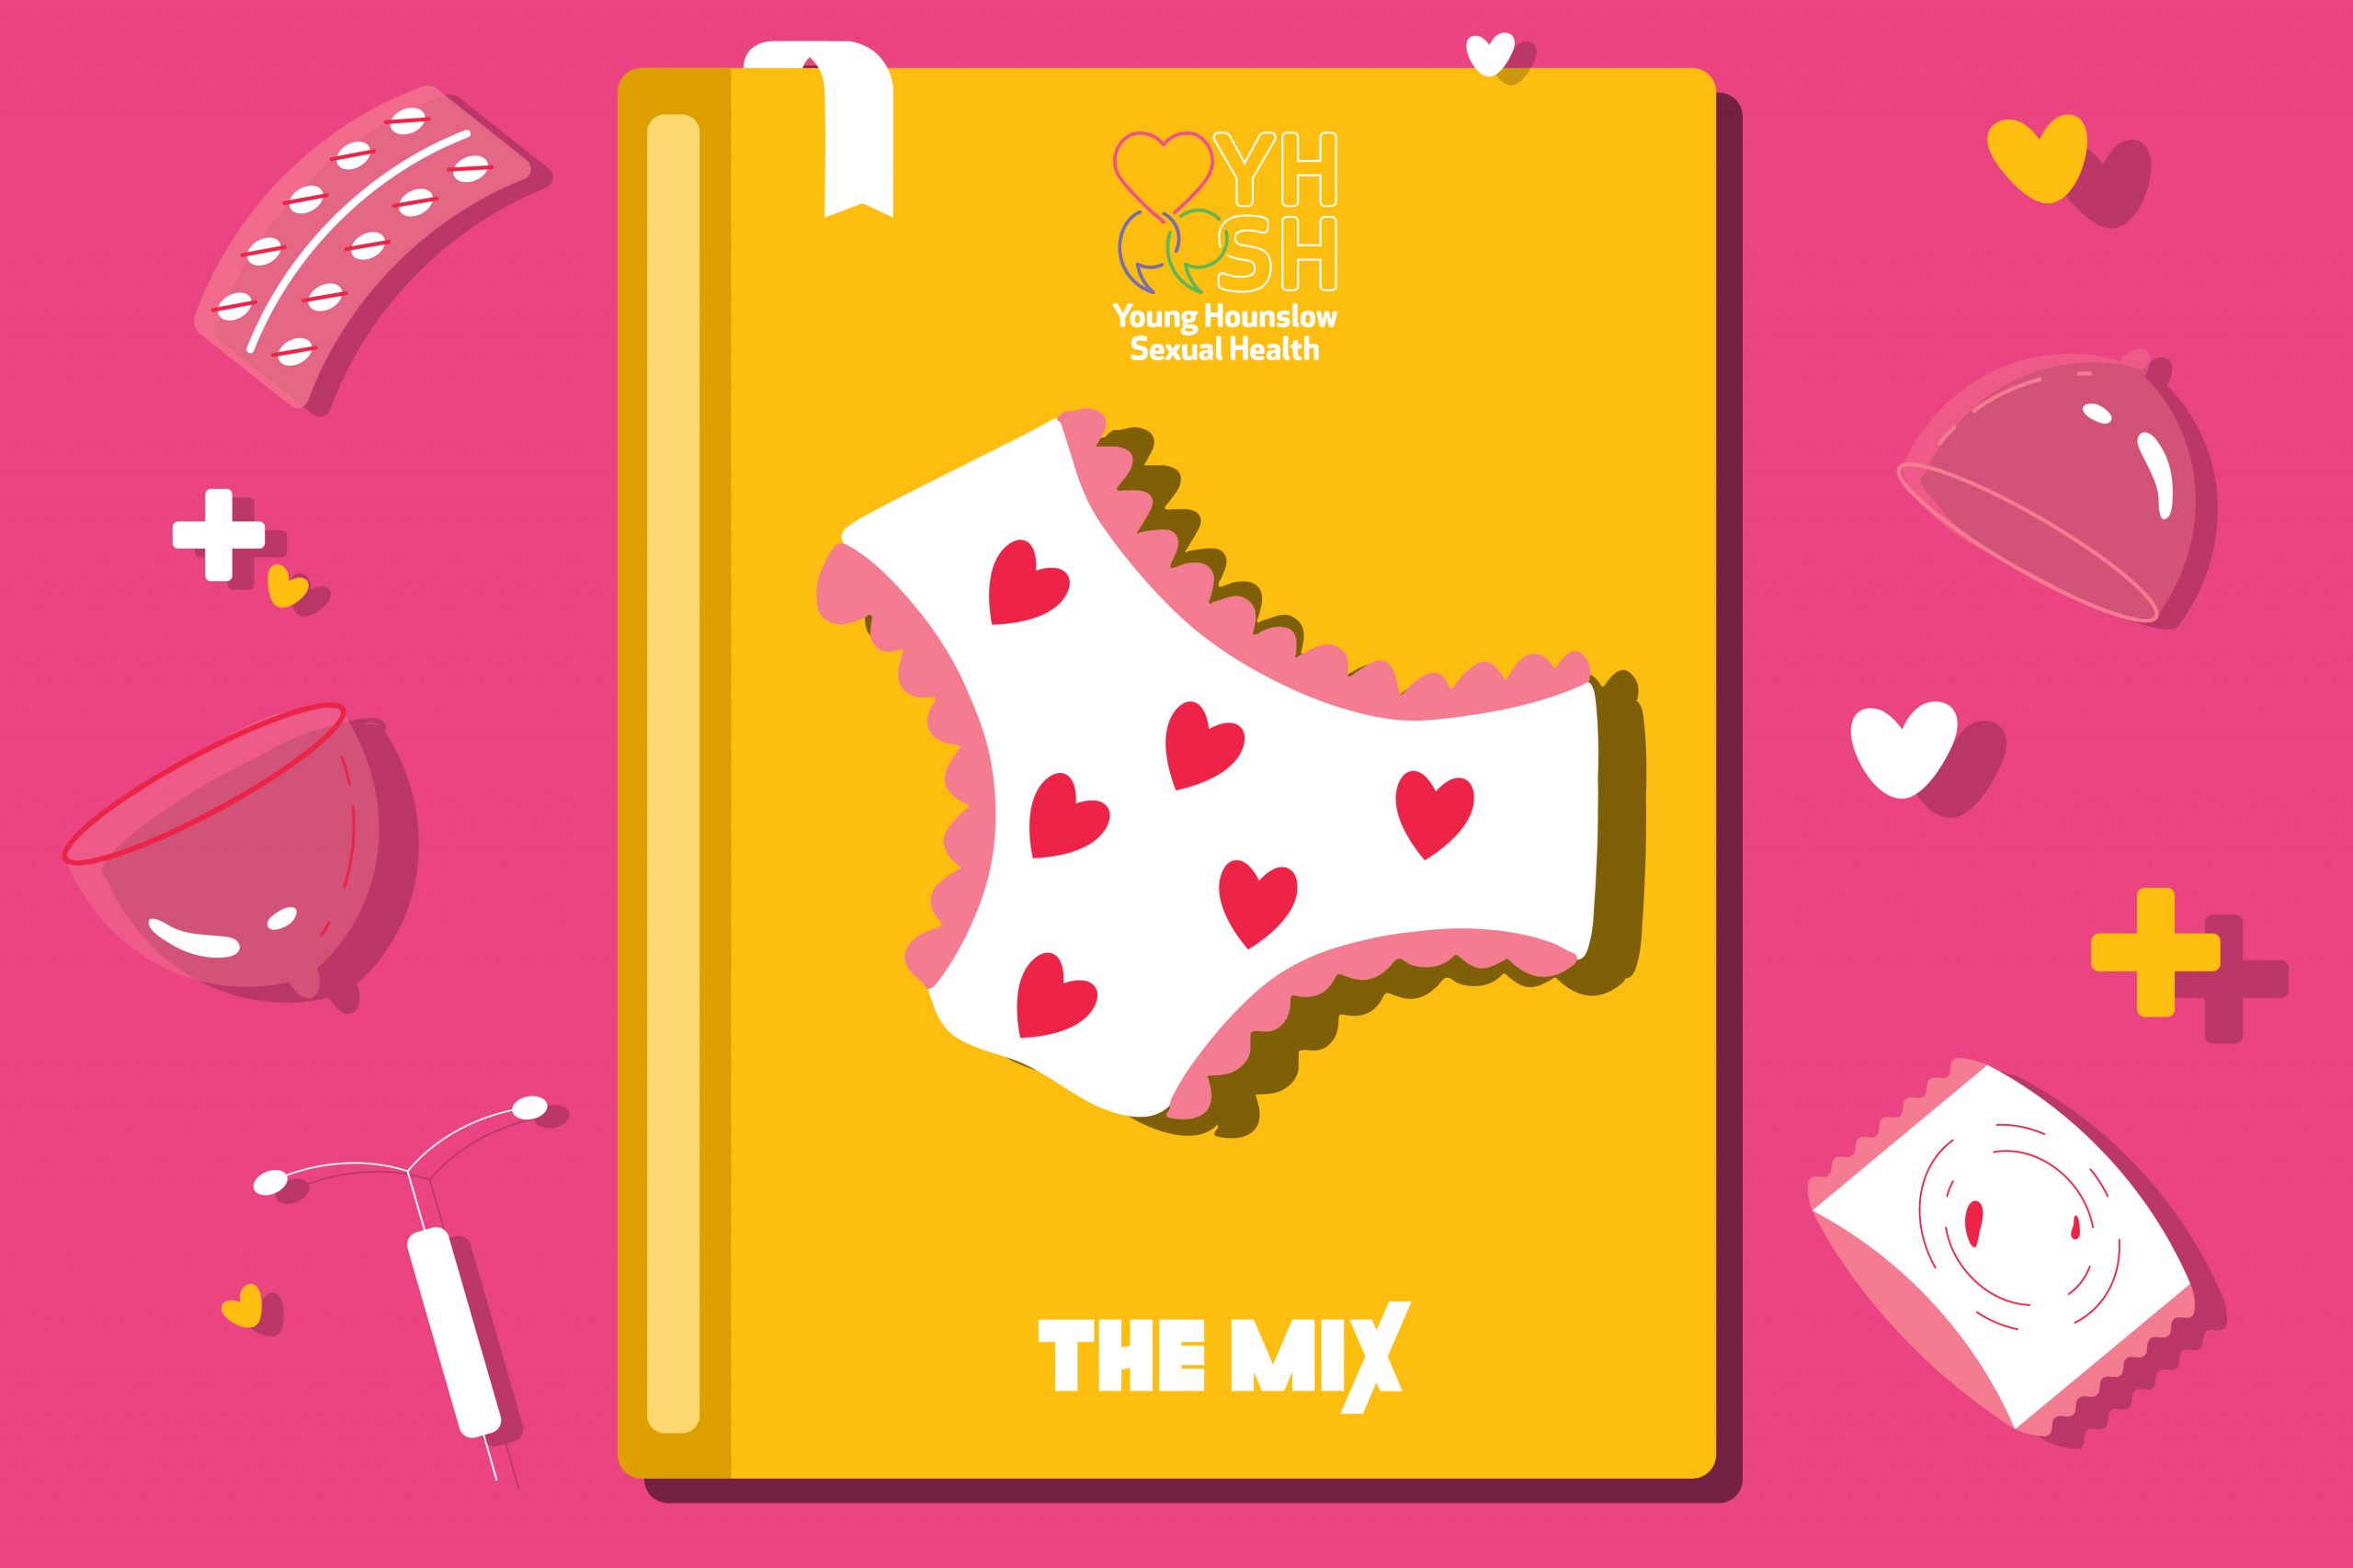 Graphic shows a yellow book with some heart covered underwear on the front cover representing a guide to first time sex. The background is pink and there are illustrations of contraception, hearts and plus signs